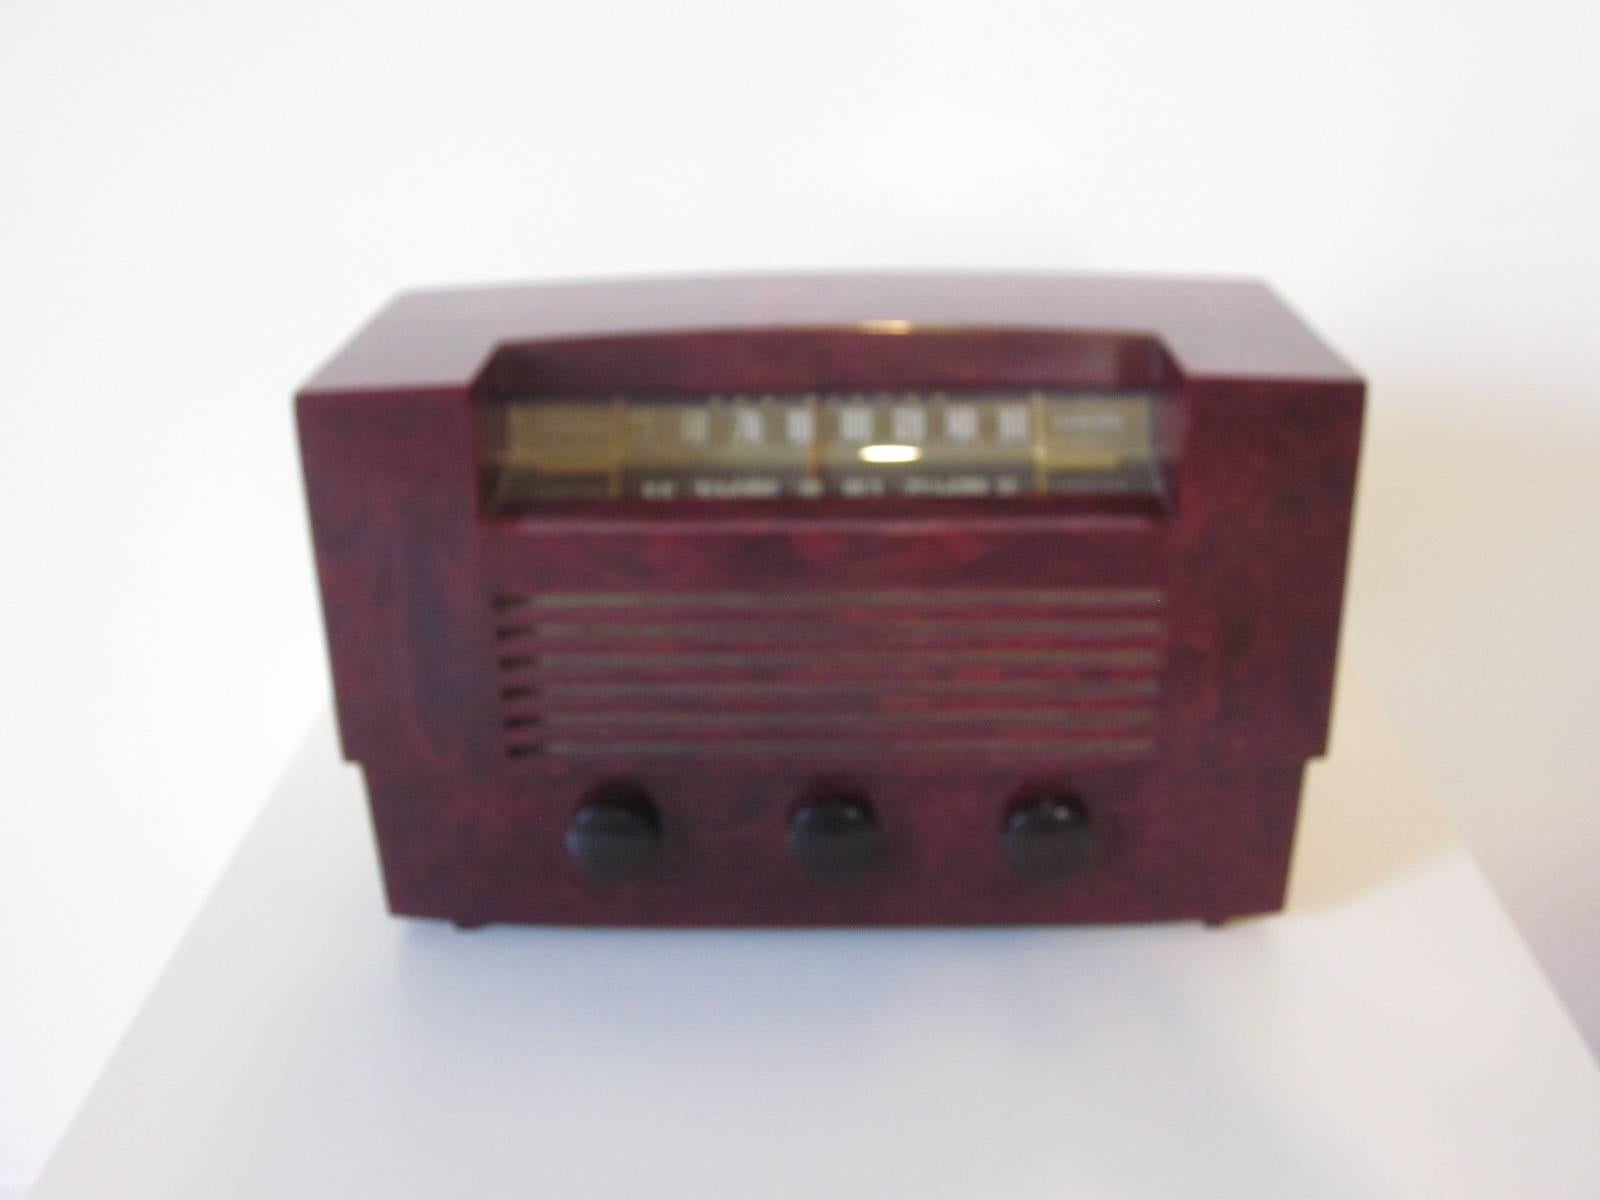 A mahogany red Catalin marbleized RCA radio with standard and short wave stations, three large knobs and glass station cover, model # 66X8, retains the paper label to the bottom manufactured by the RCA Victor company.